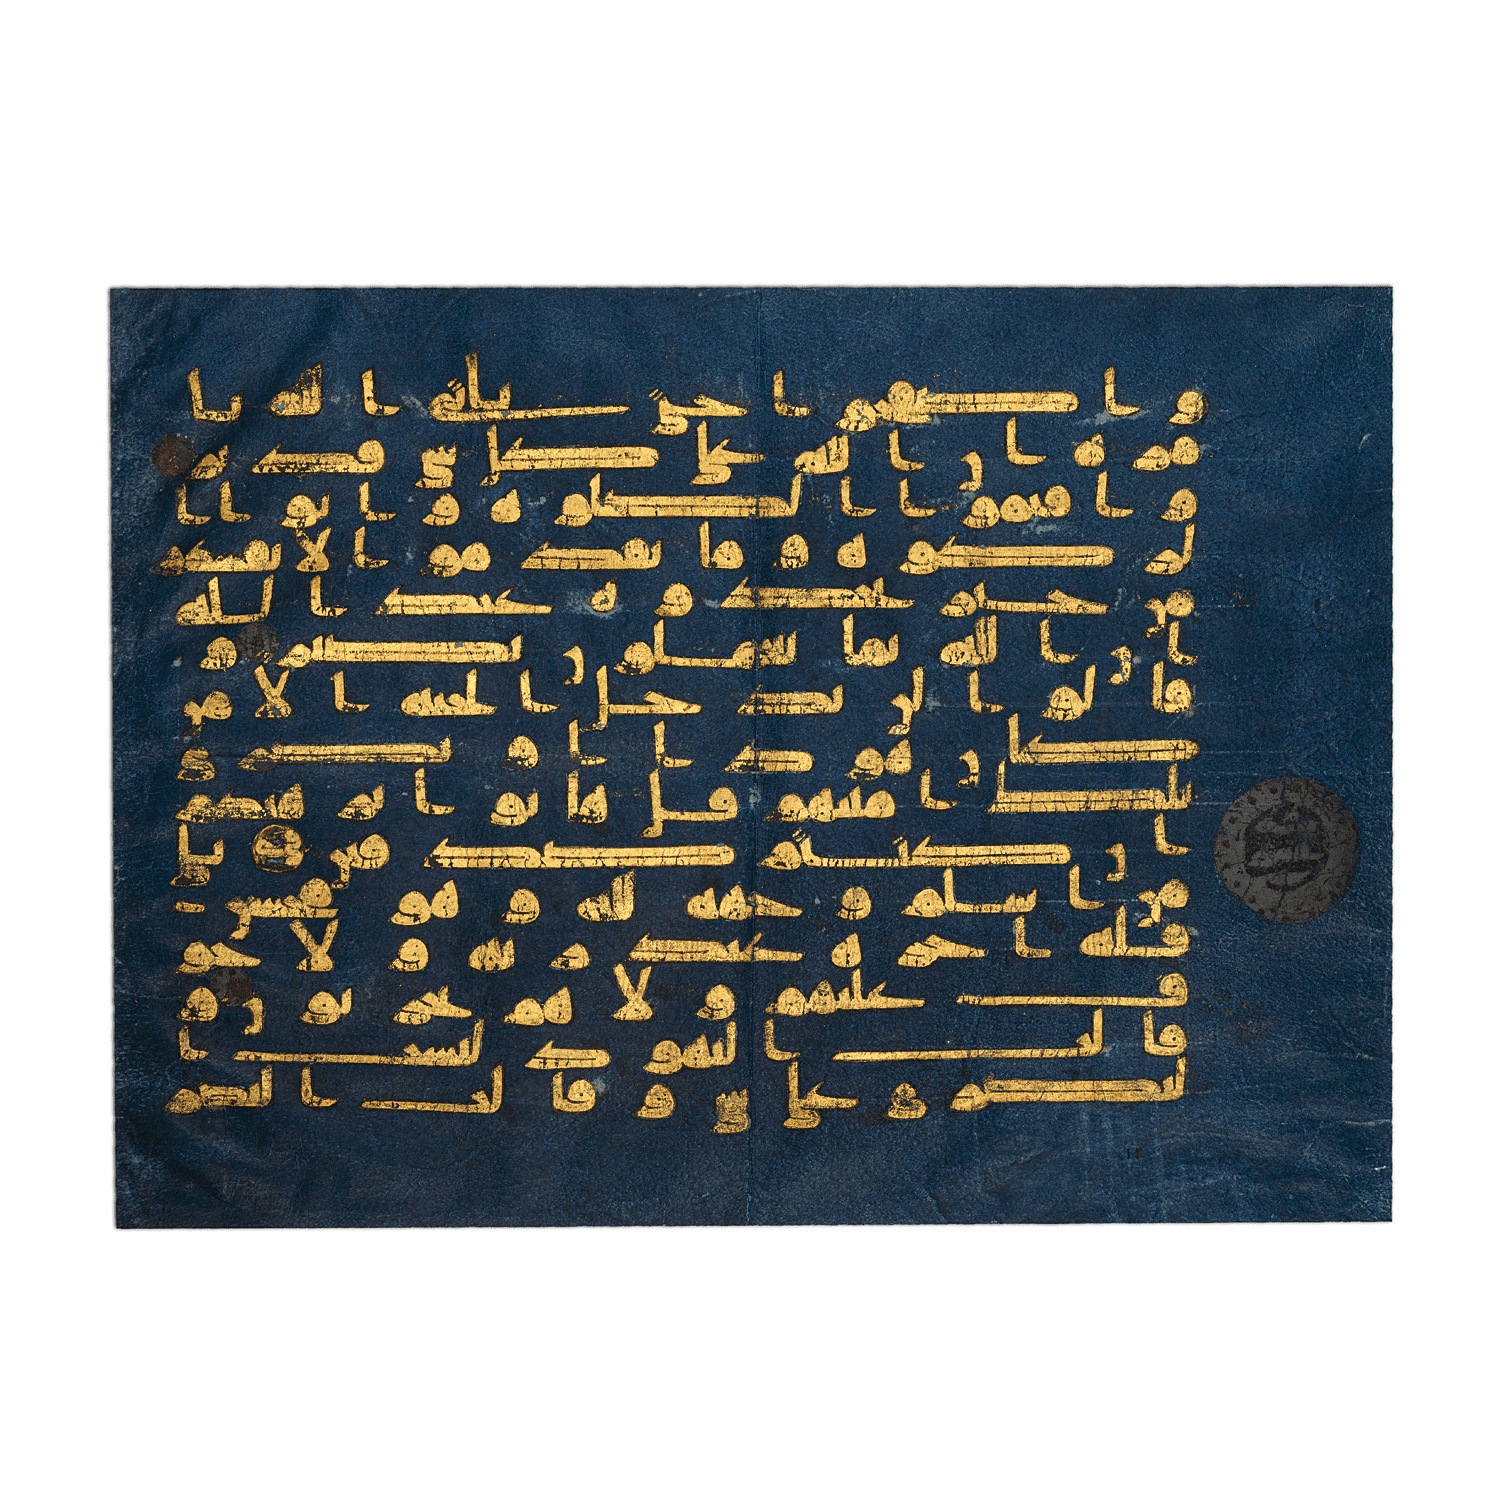 A page of the Qur'an written in gold ink on blue vellum.